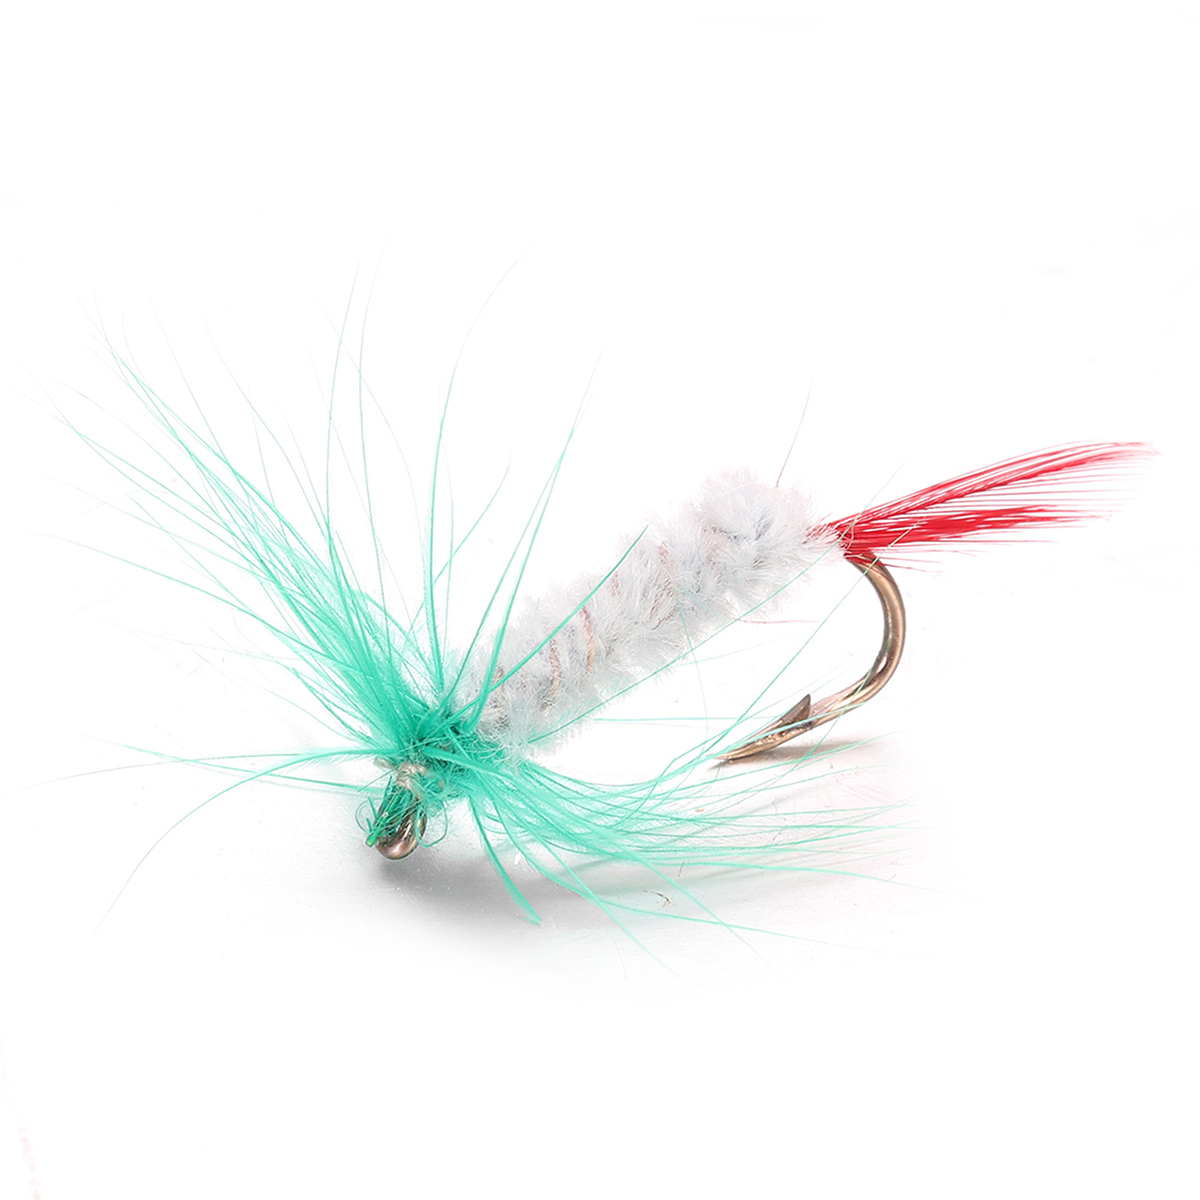 ZANLURE-20-Pcs-Fishing-Lures-Portable-Metal-Fly-Hook-Used-for-Trout-Freshwater-Saltwater-Outdoor-Fis-1837798-4